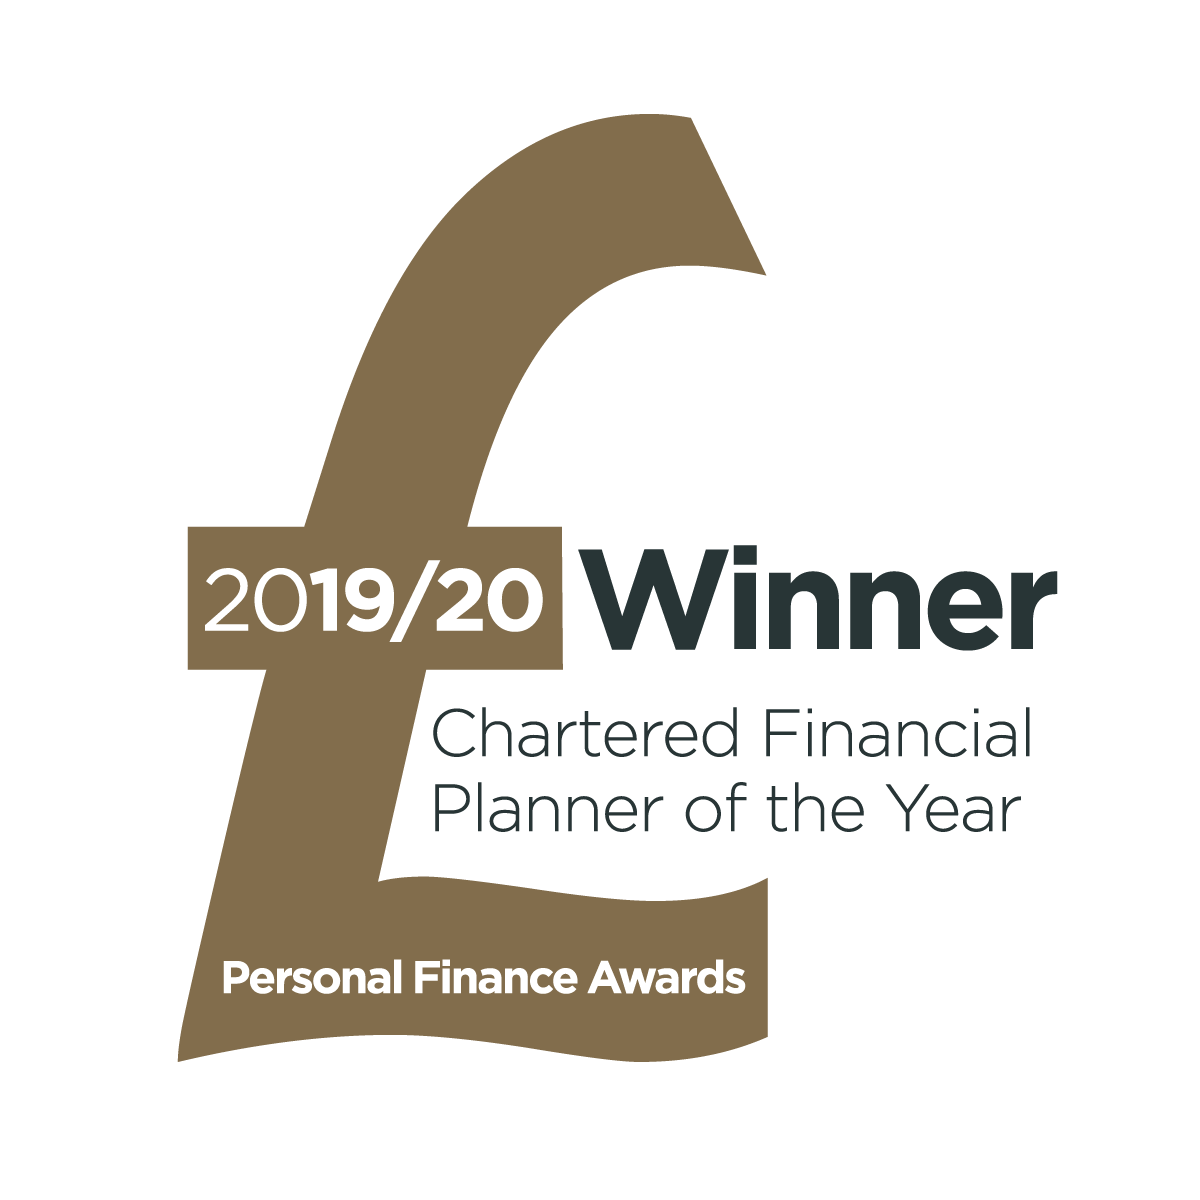 Chartered Financial Planner 2019